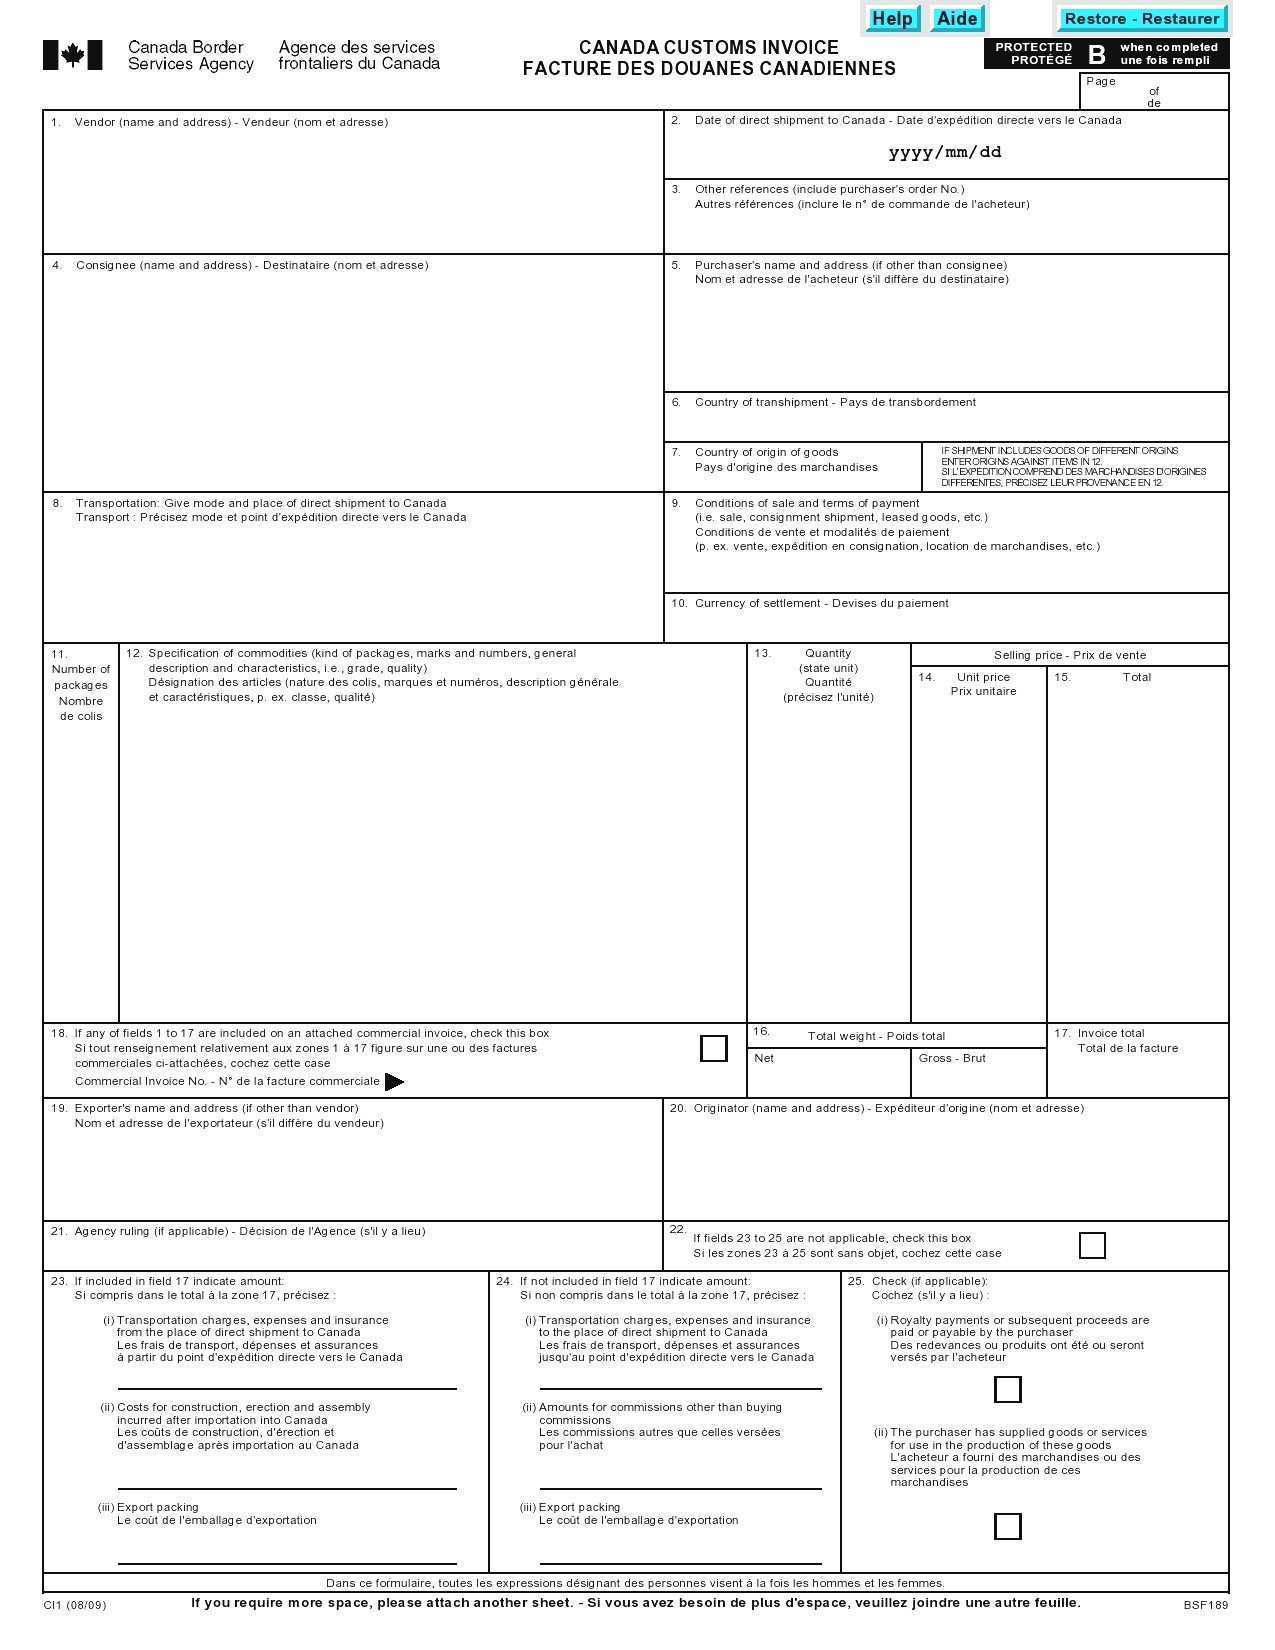 32 Blank Us Customs Invoice Template With Stunning Design with Us Customs Invoice Template